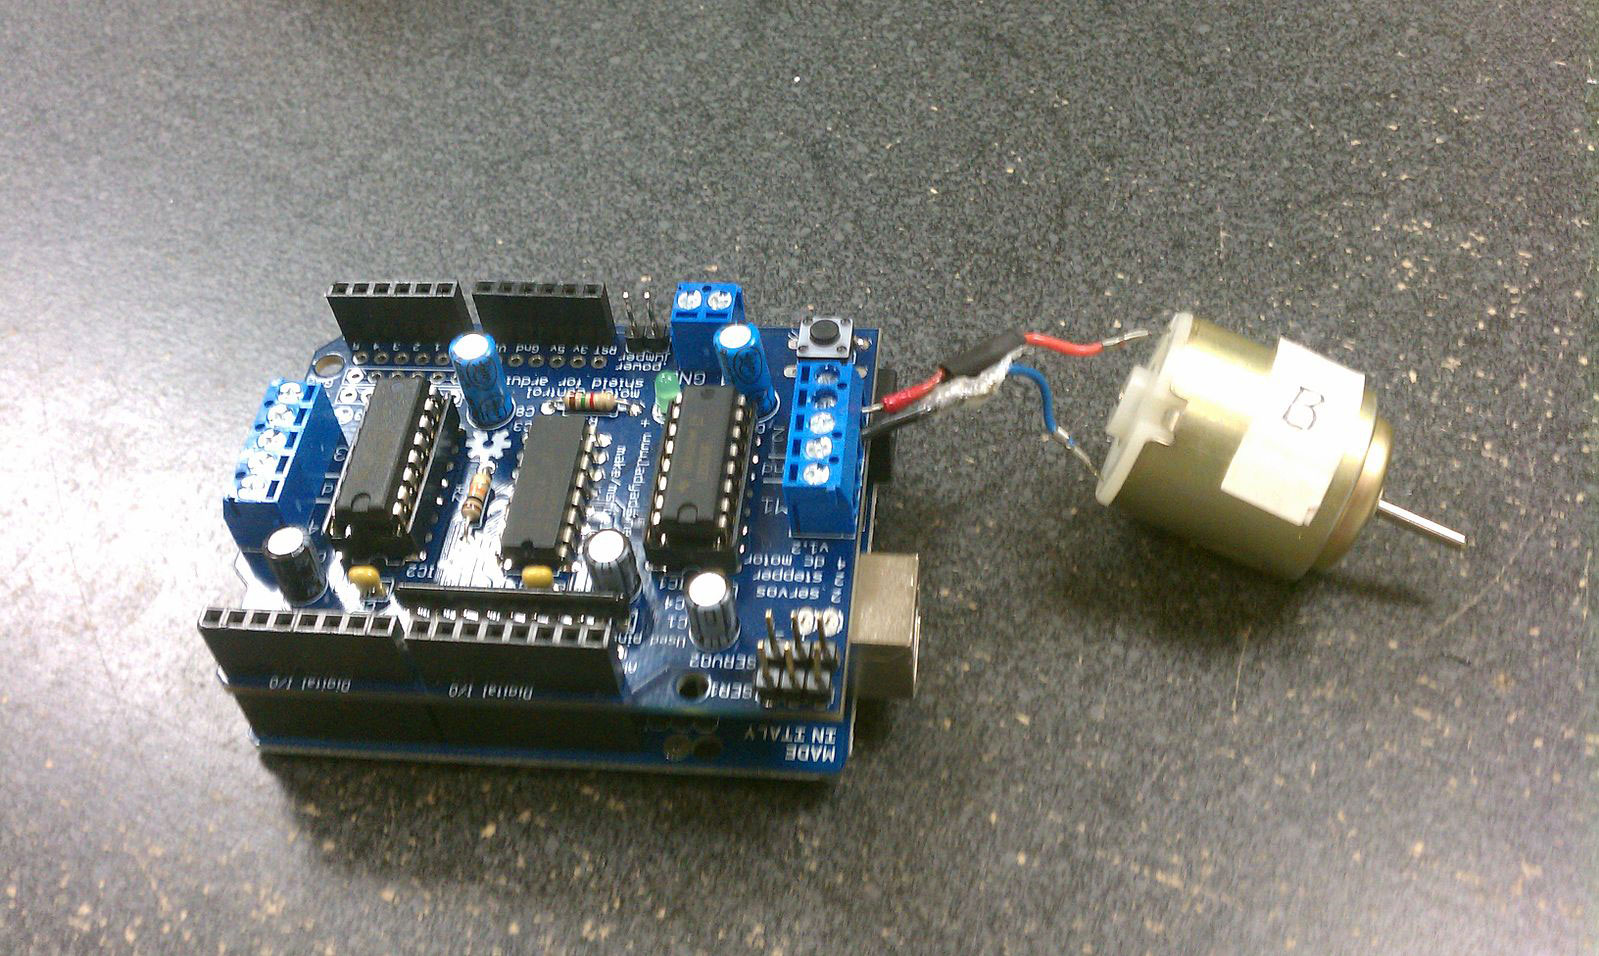 An Arduino motor shield with a 3V DC motor attached